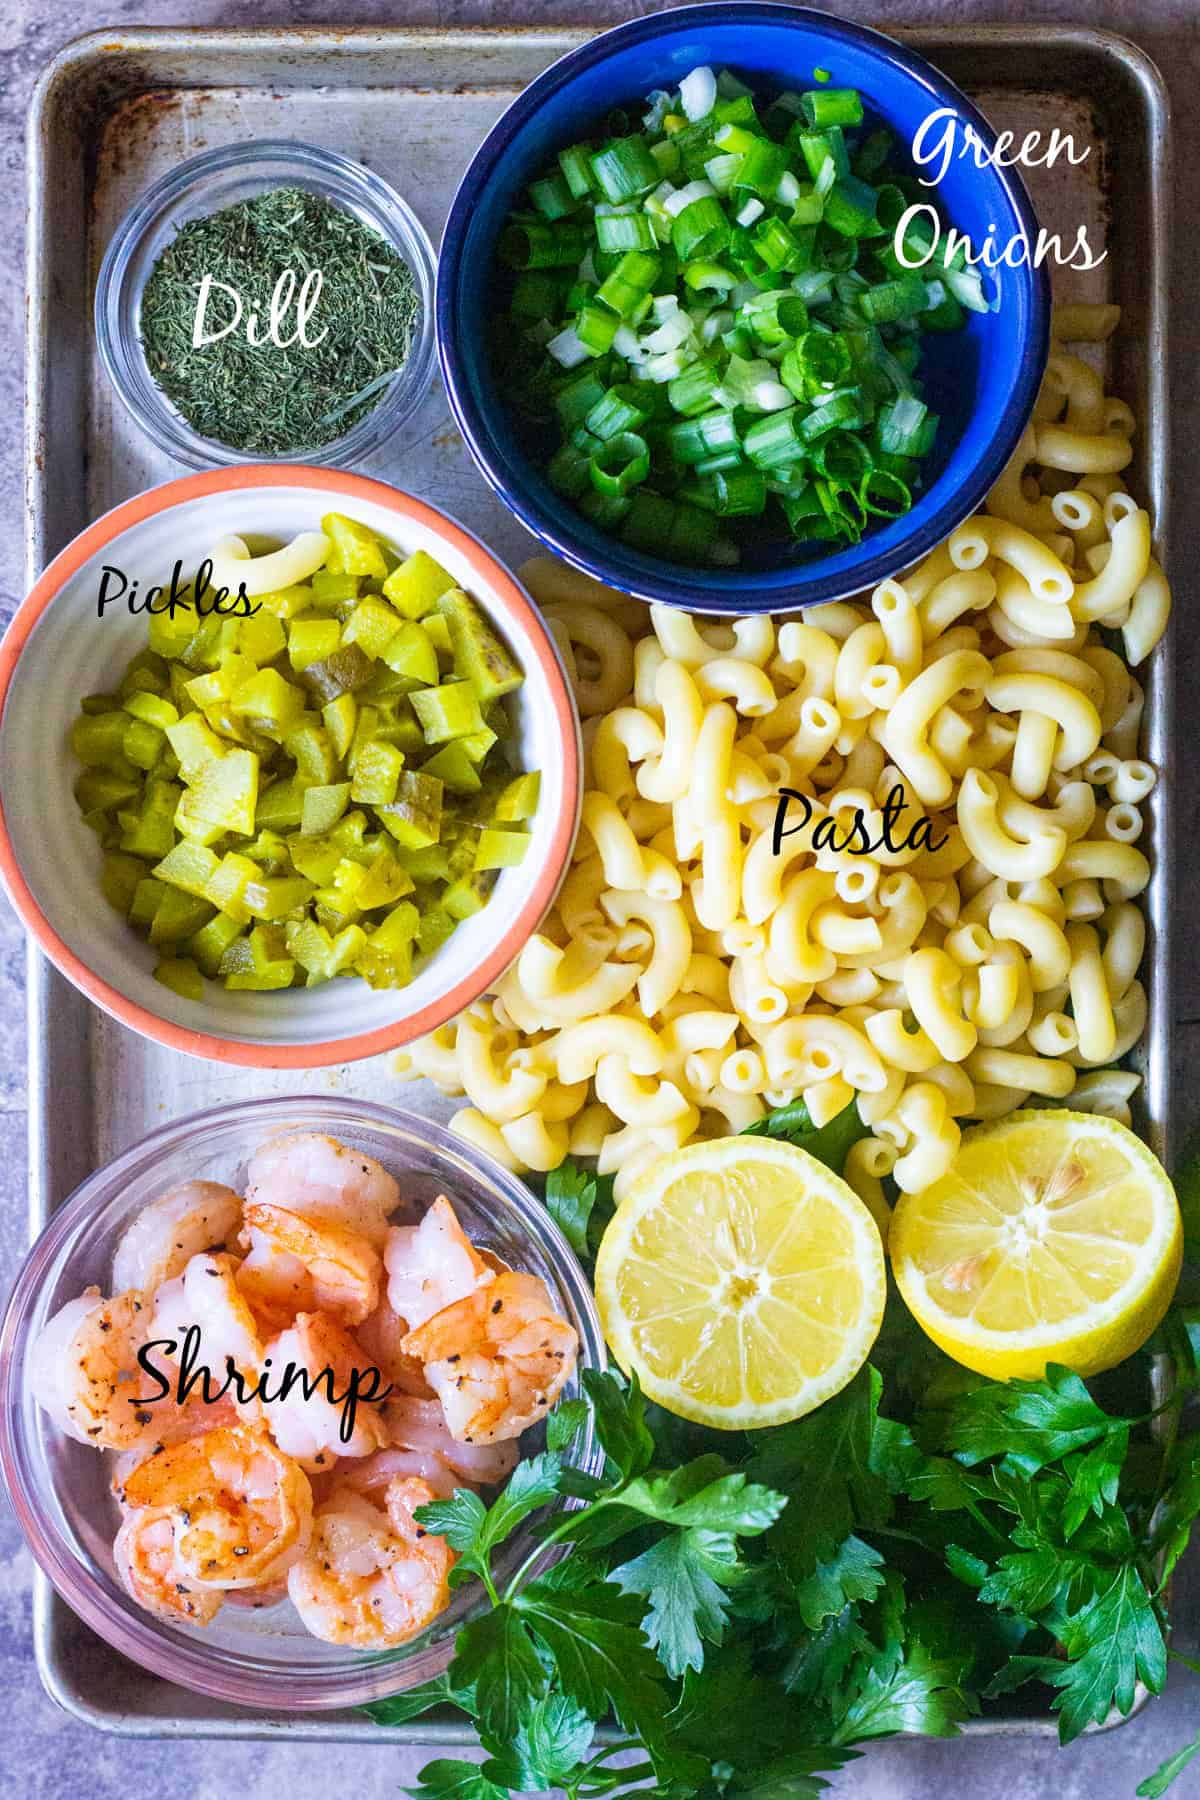 shrimp macaroni salad ingredients are cooked shrimp, pasta, parsley, dill, dill pickles, green onion, and lemon. 